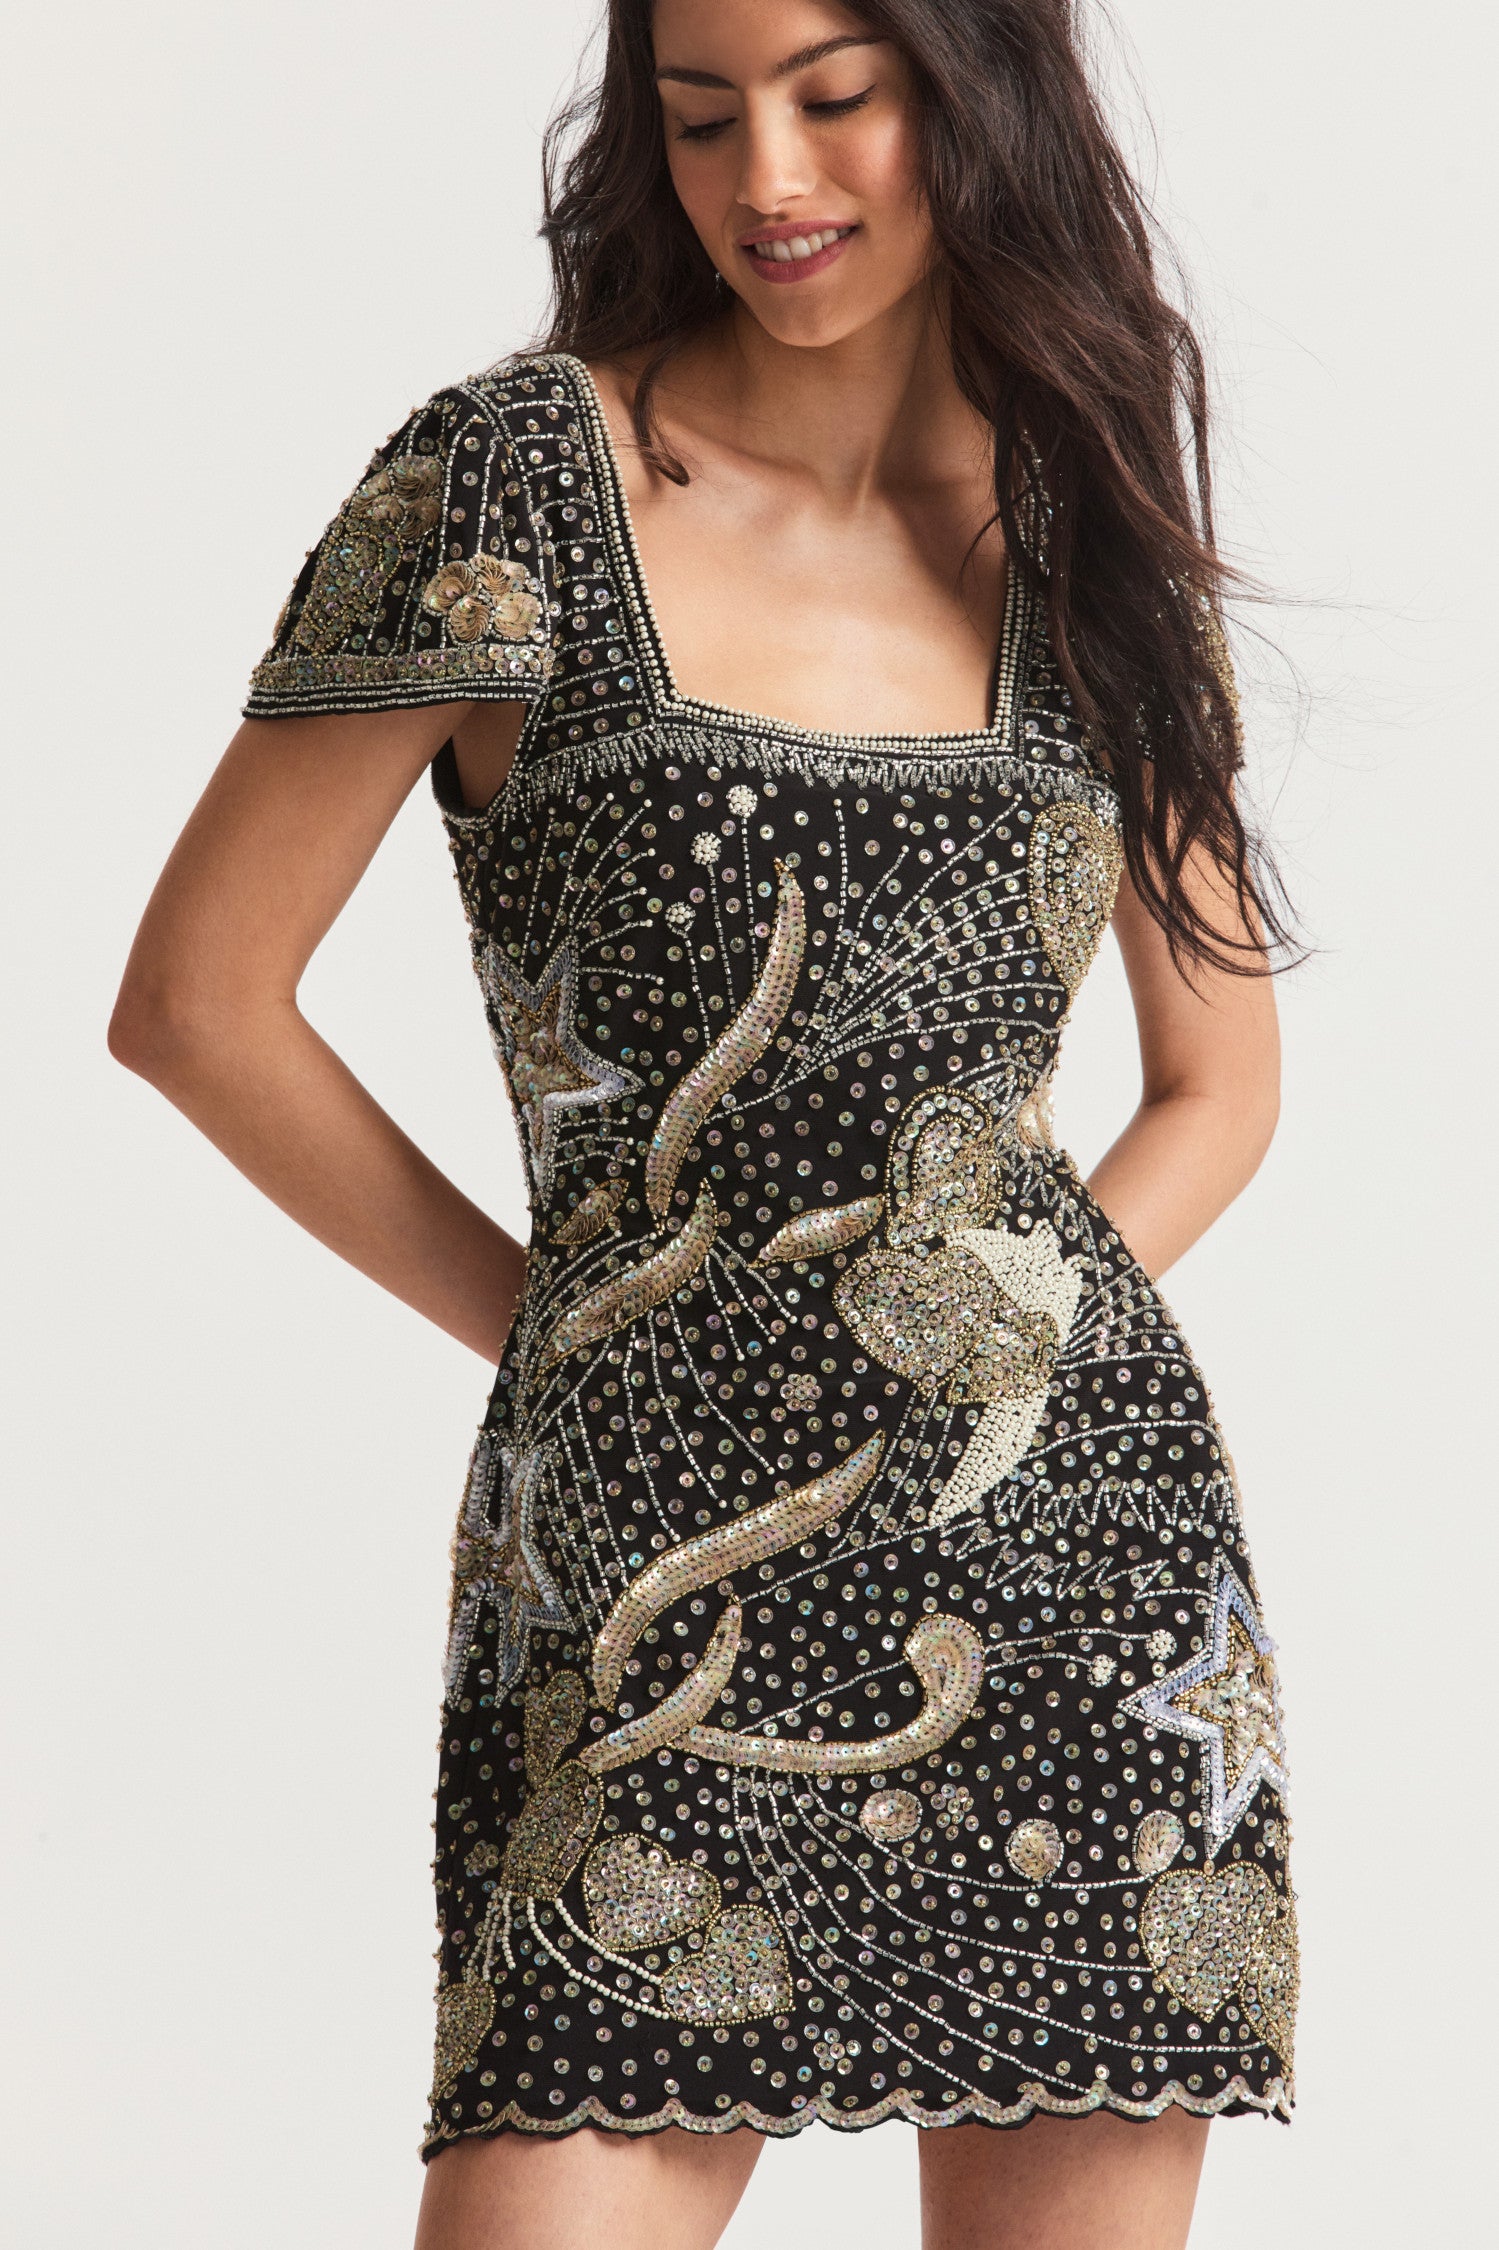 Black mini dress with iridescent gold and silver sequins outlining an arrangement of whimsical hearts and stars with wisps and sprays of shimmer all over on a stretchy crepe fabric for easy wear. Fully lined, this dress features a square neckline, cap sleeves, a fitted style, and a small sweep with a sequined scalloped finish.